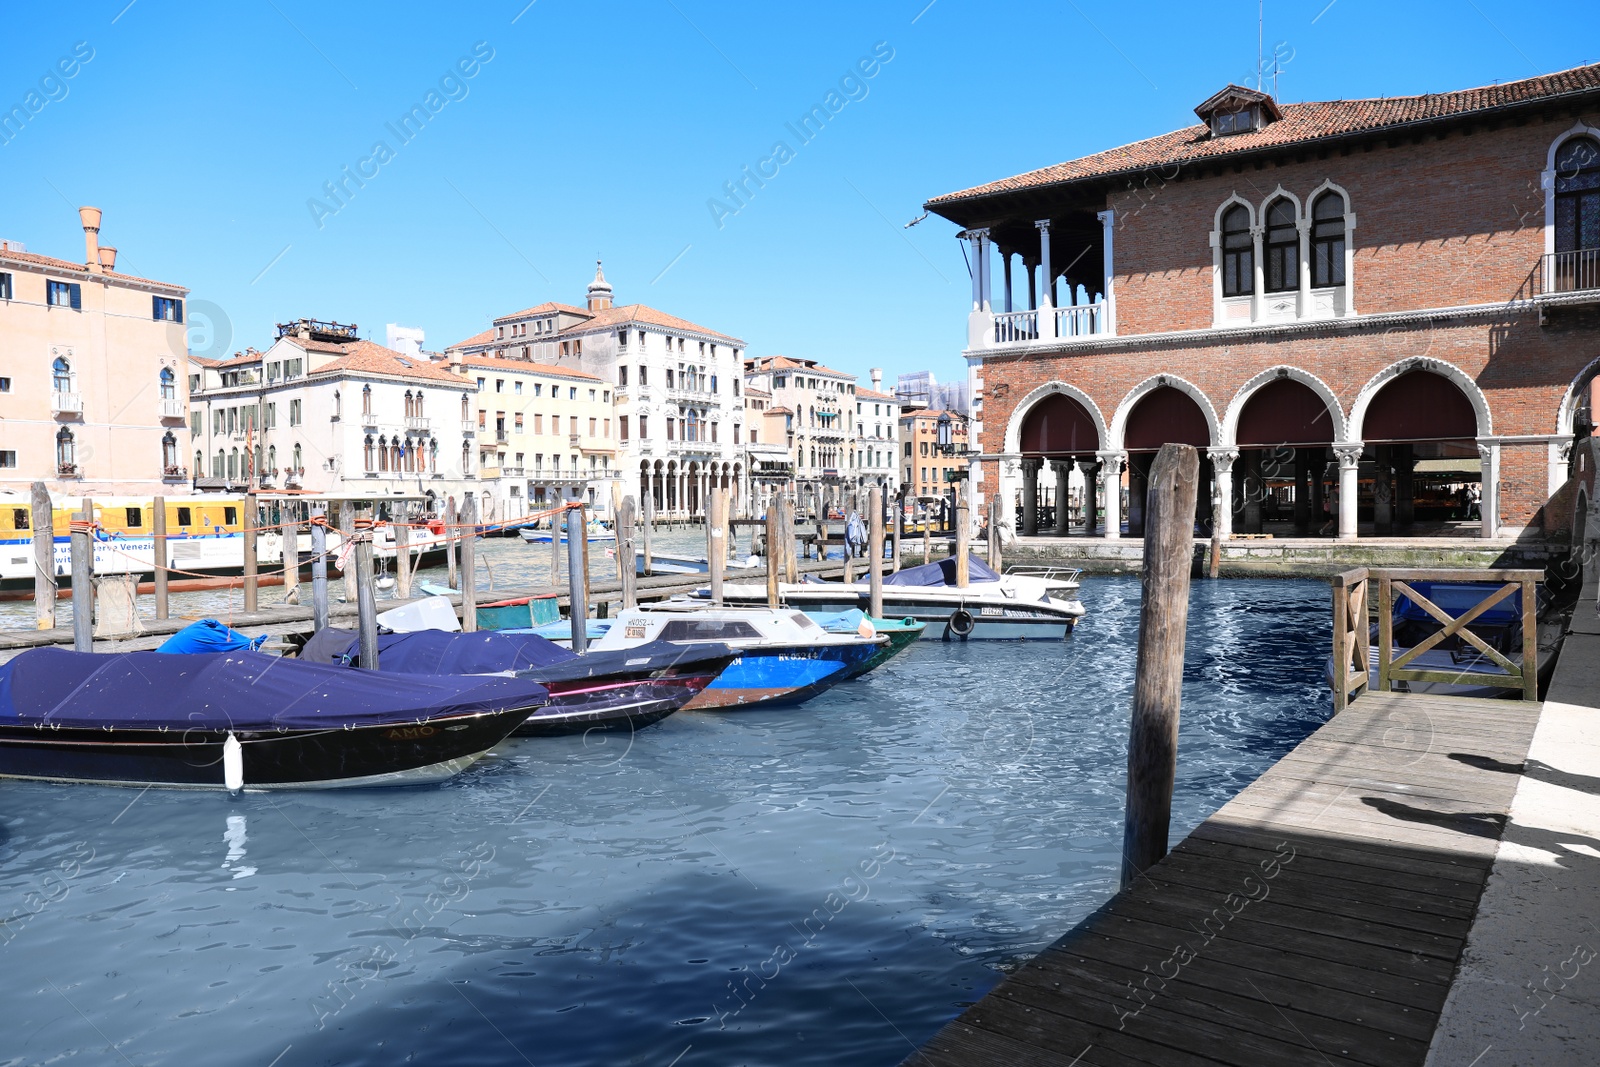 Photo of VENICE, ITALY - JUNE 13, 2019: Boats moored at pier in city